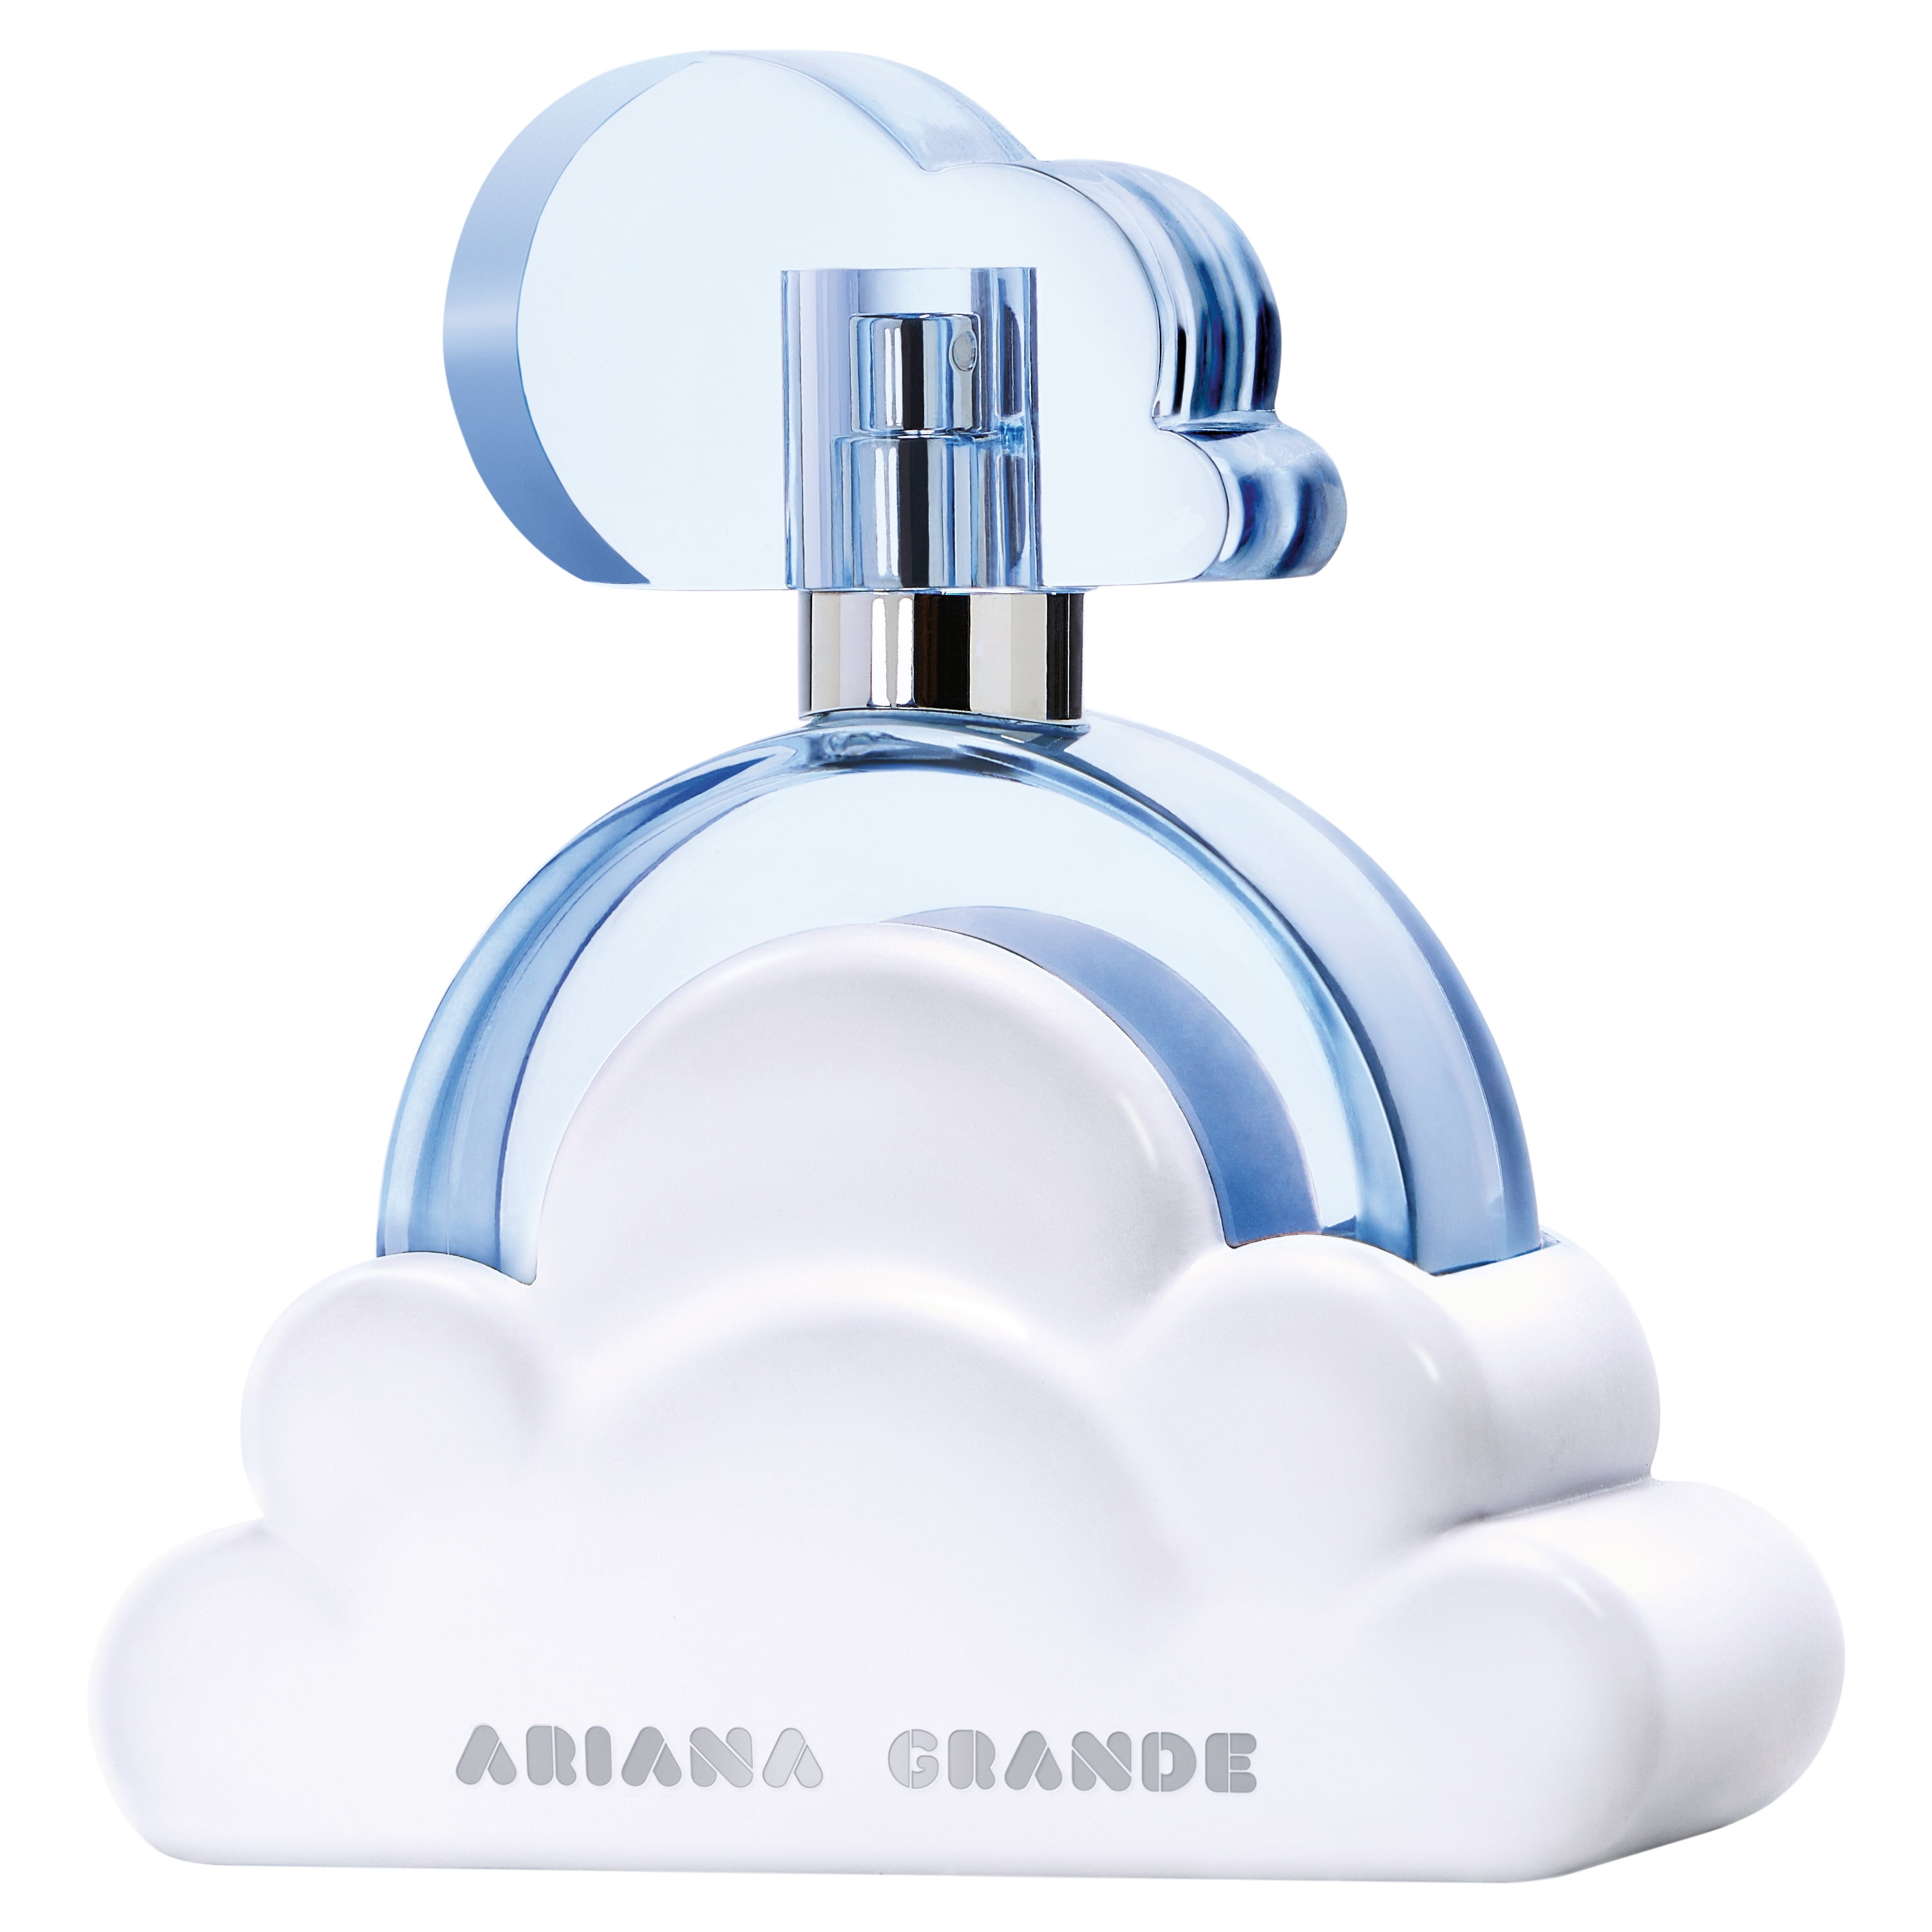 Cloud by Ariana Grande 3.4 oz EDP for Women - ForeverLux